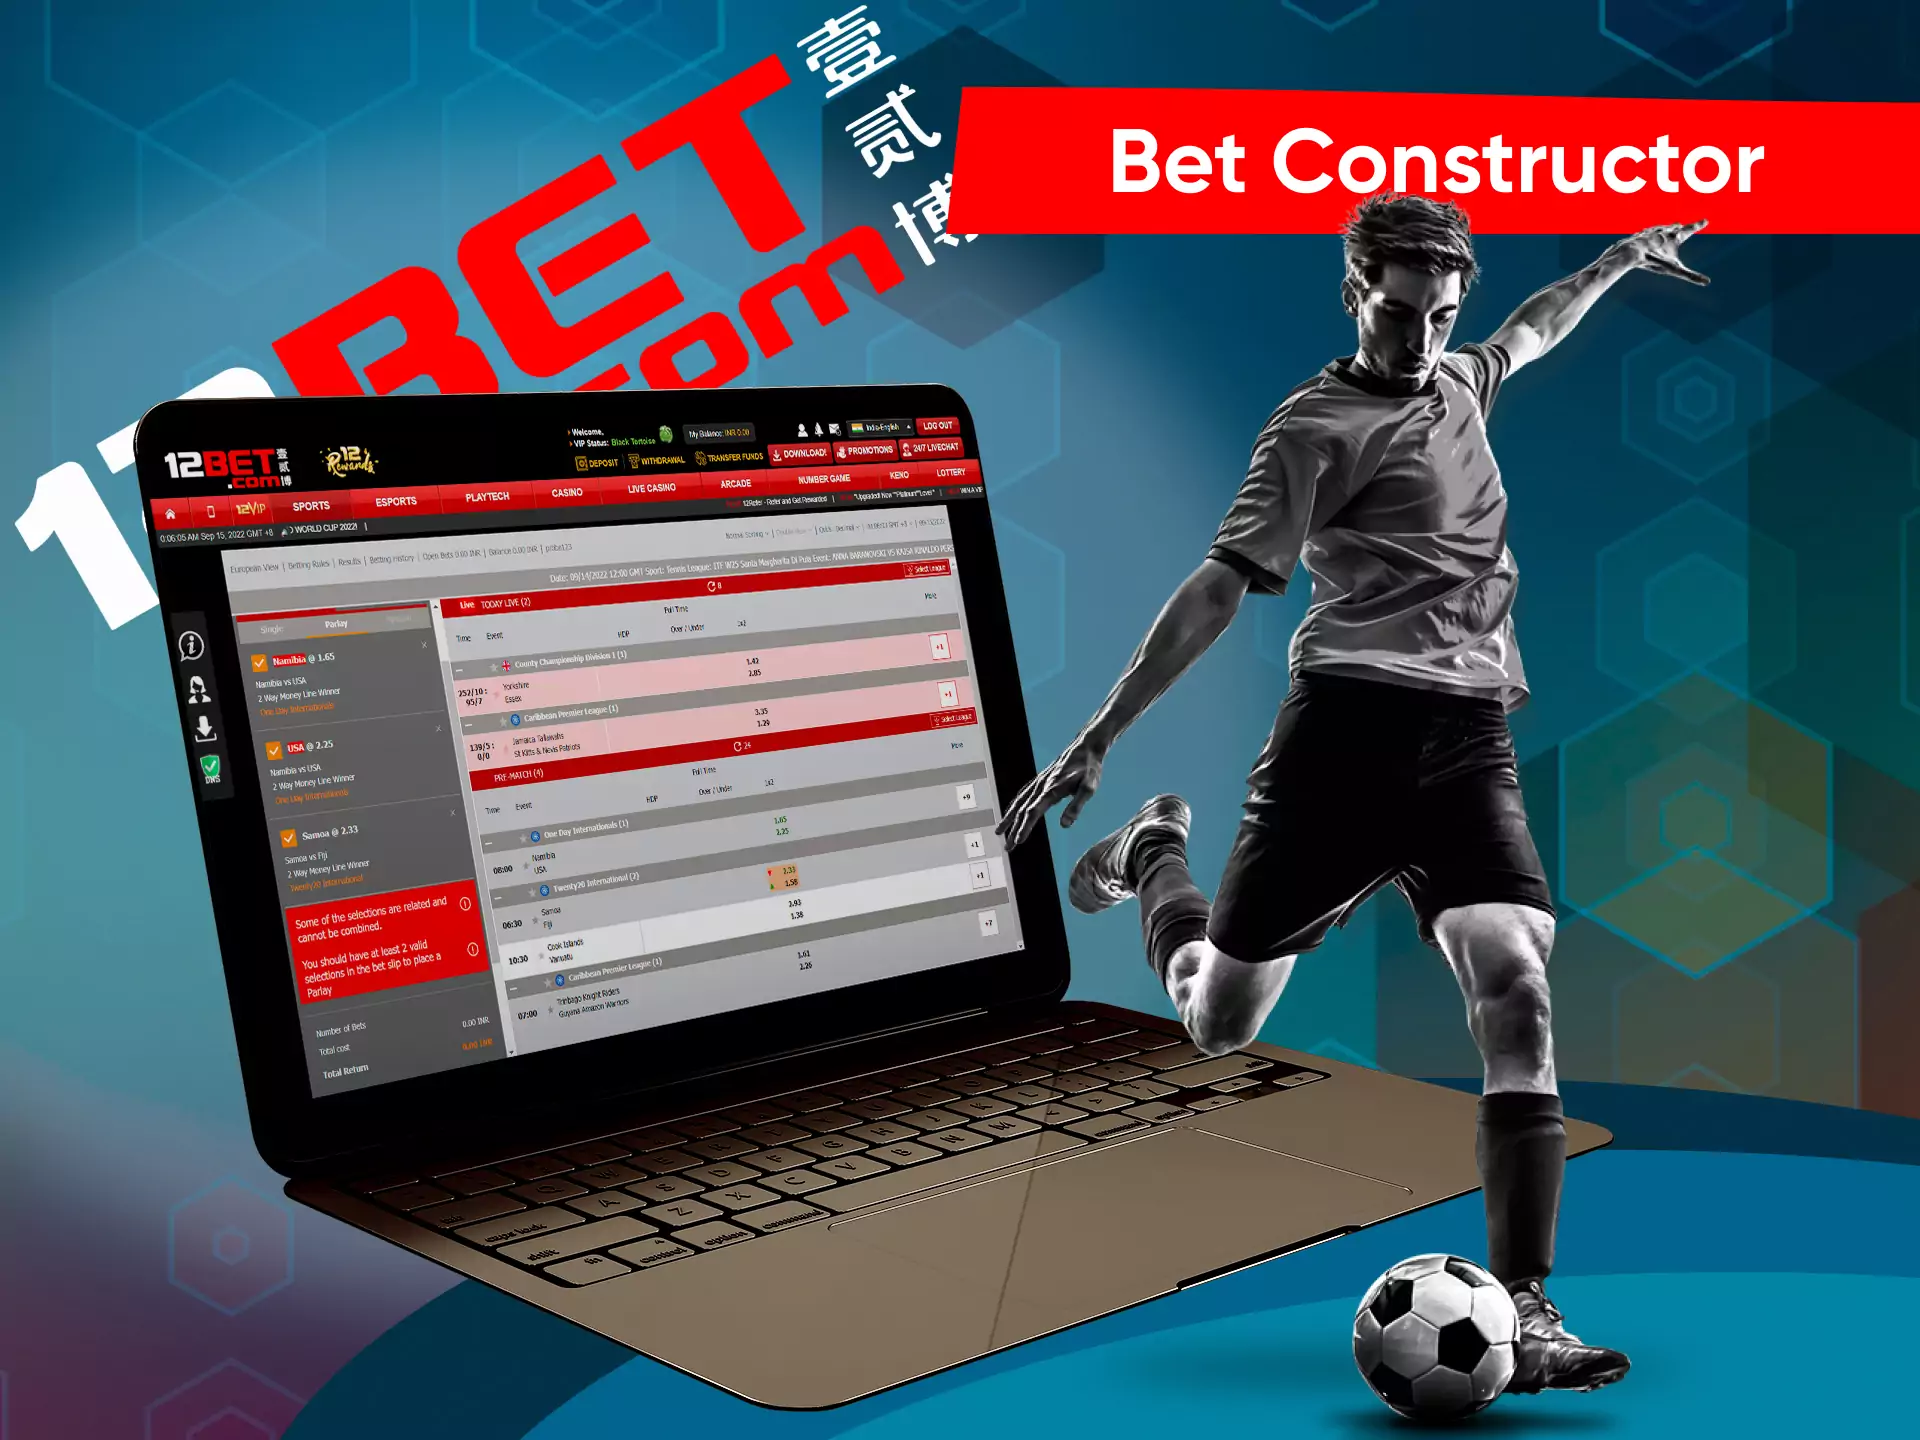 Use the bet constructor to place bets with ease on 12bet.